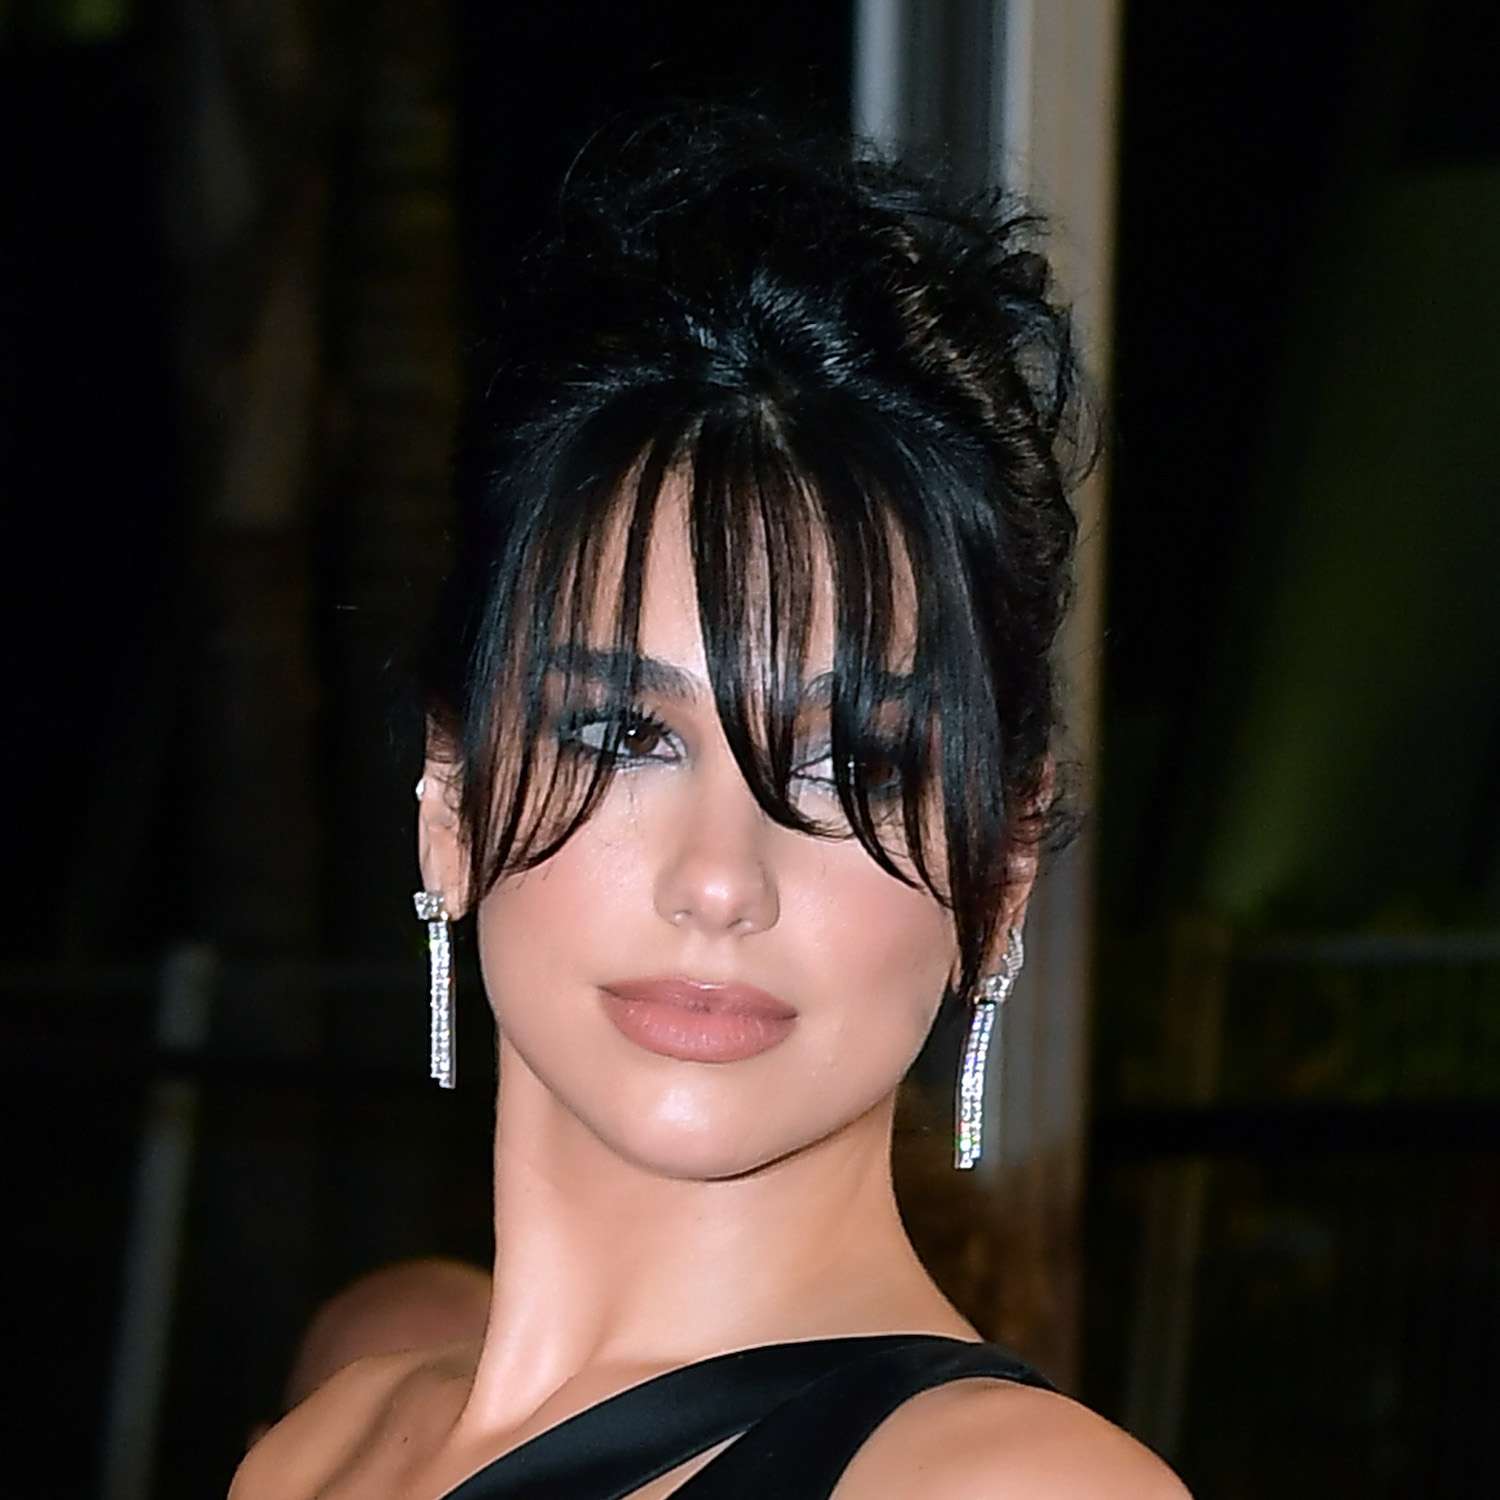 Dua Lipa wears an updo hairstyle with statement curved bangs over her face